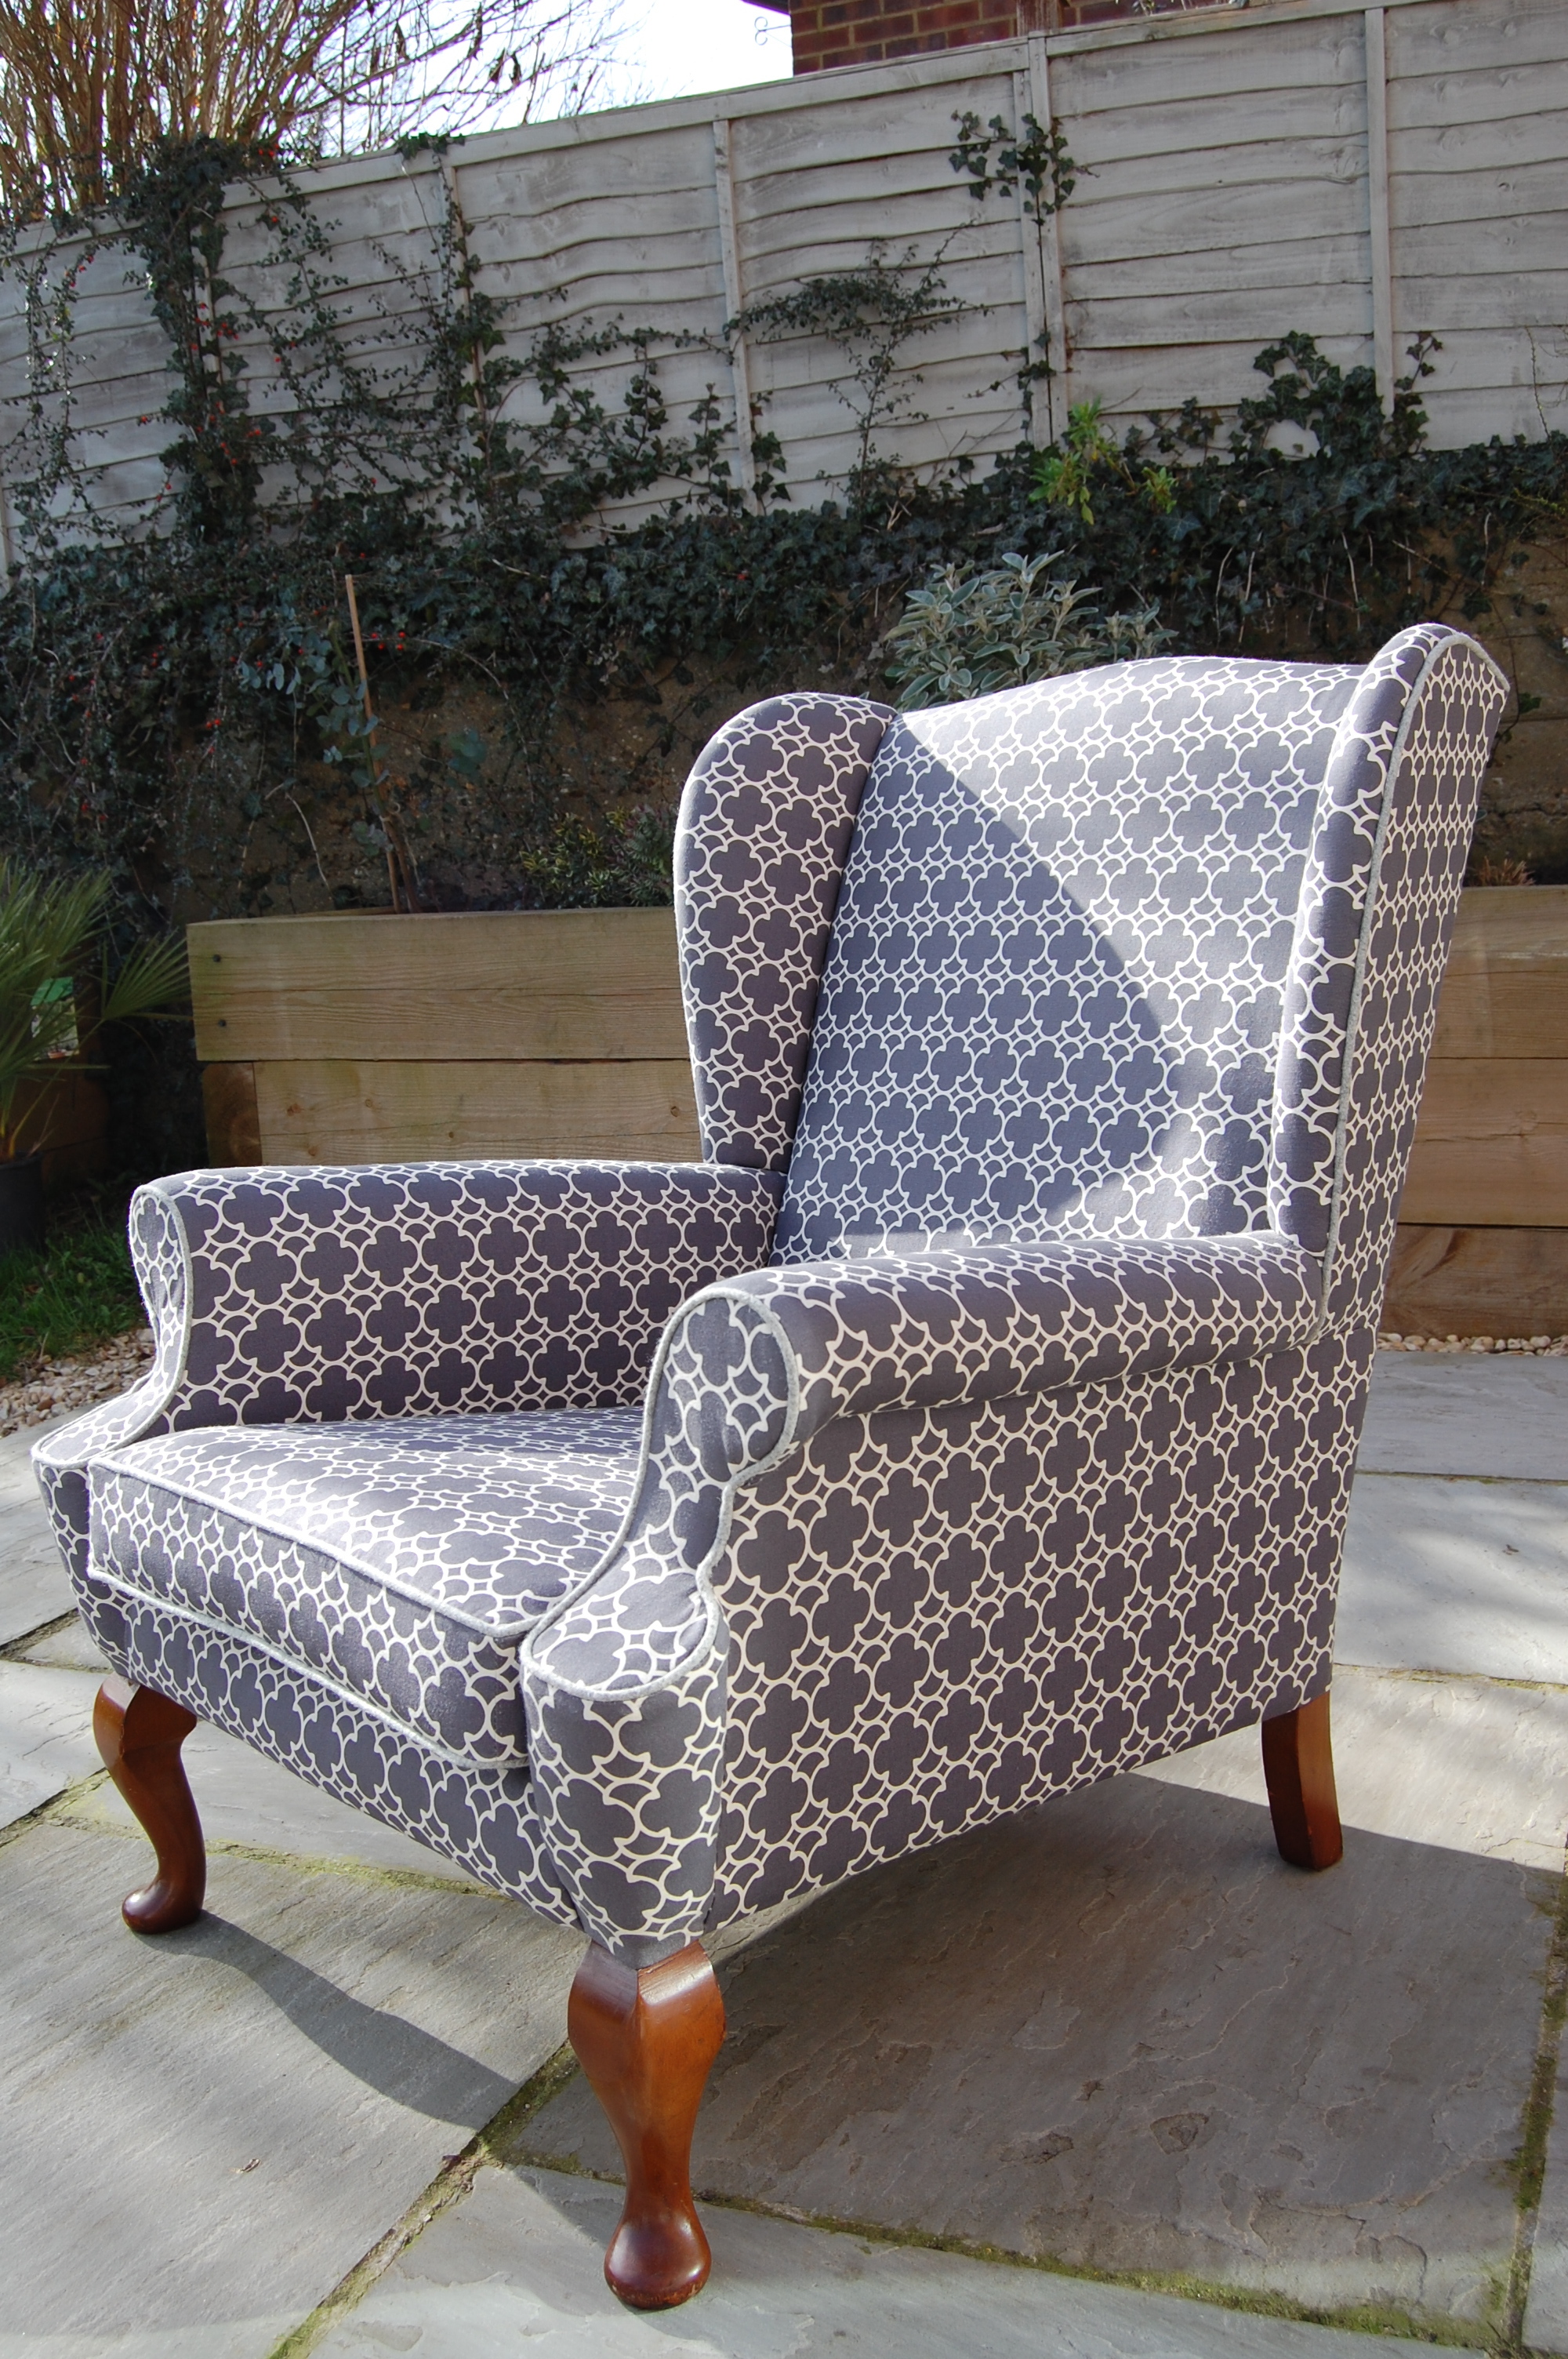 Grist & Twine Upholstery: Mid-century wingback armchair reupholstered in Korla geometric fabric